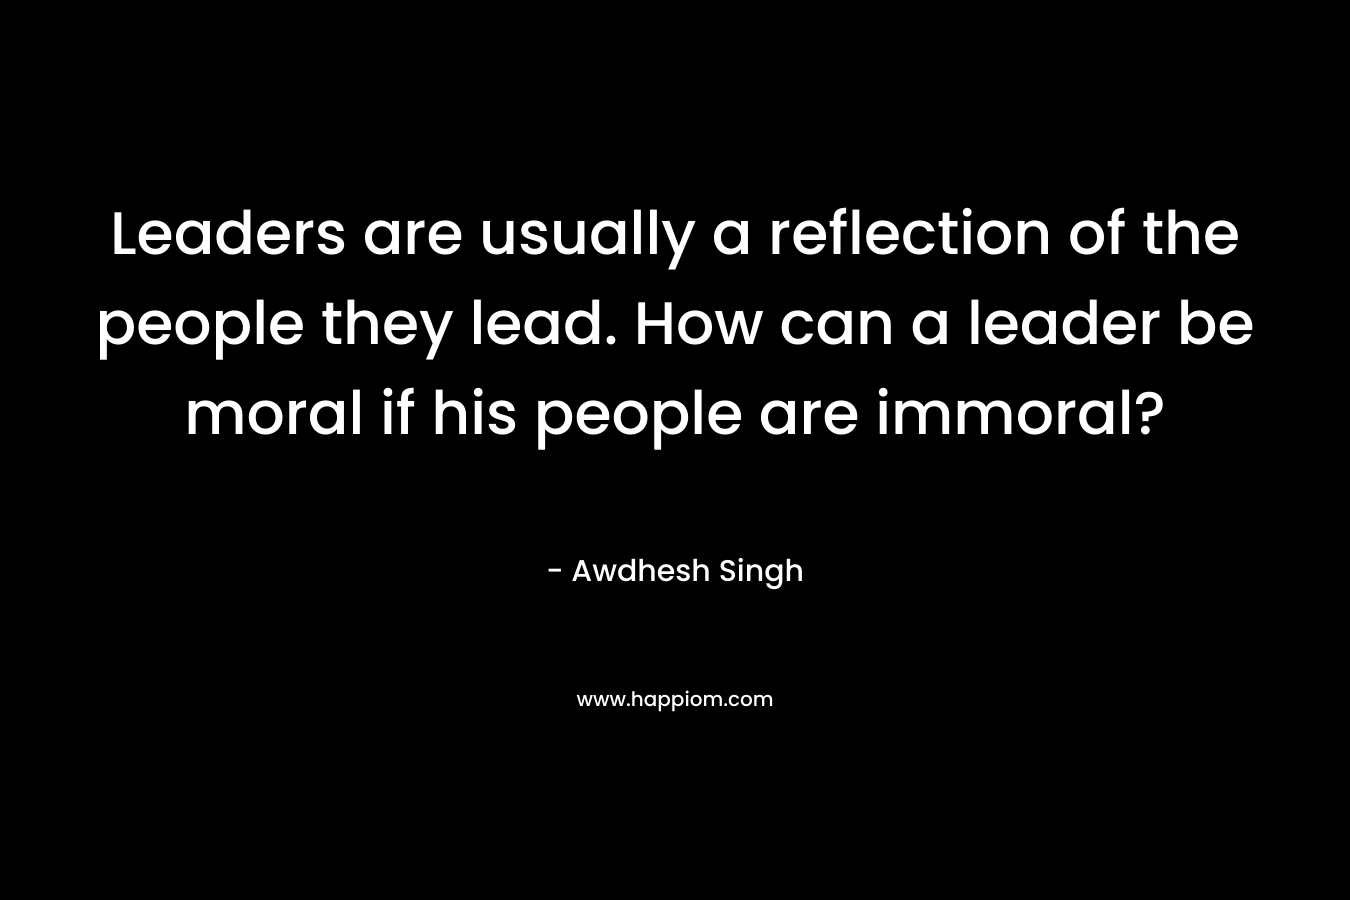 Leaders are usually a reflection of the people they lead. How can a leader be moral if his people are immoral?